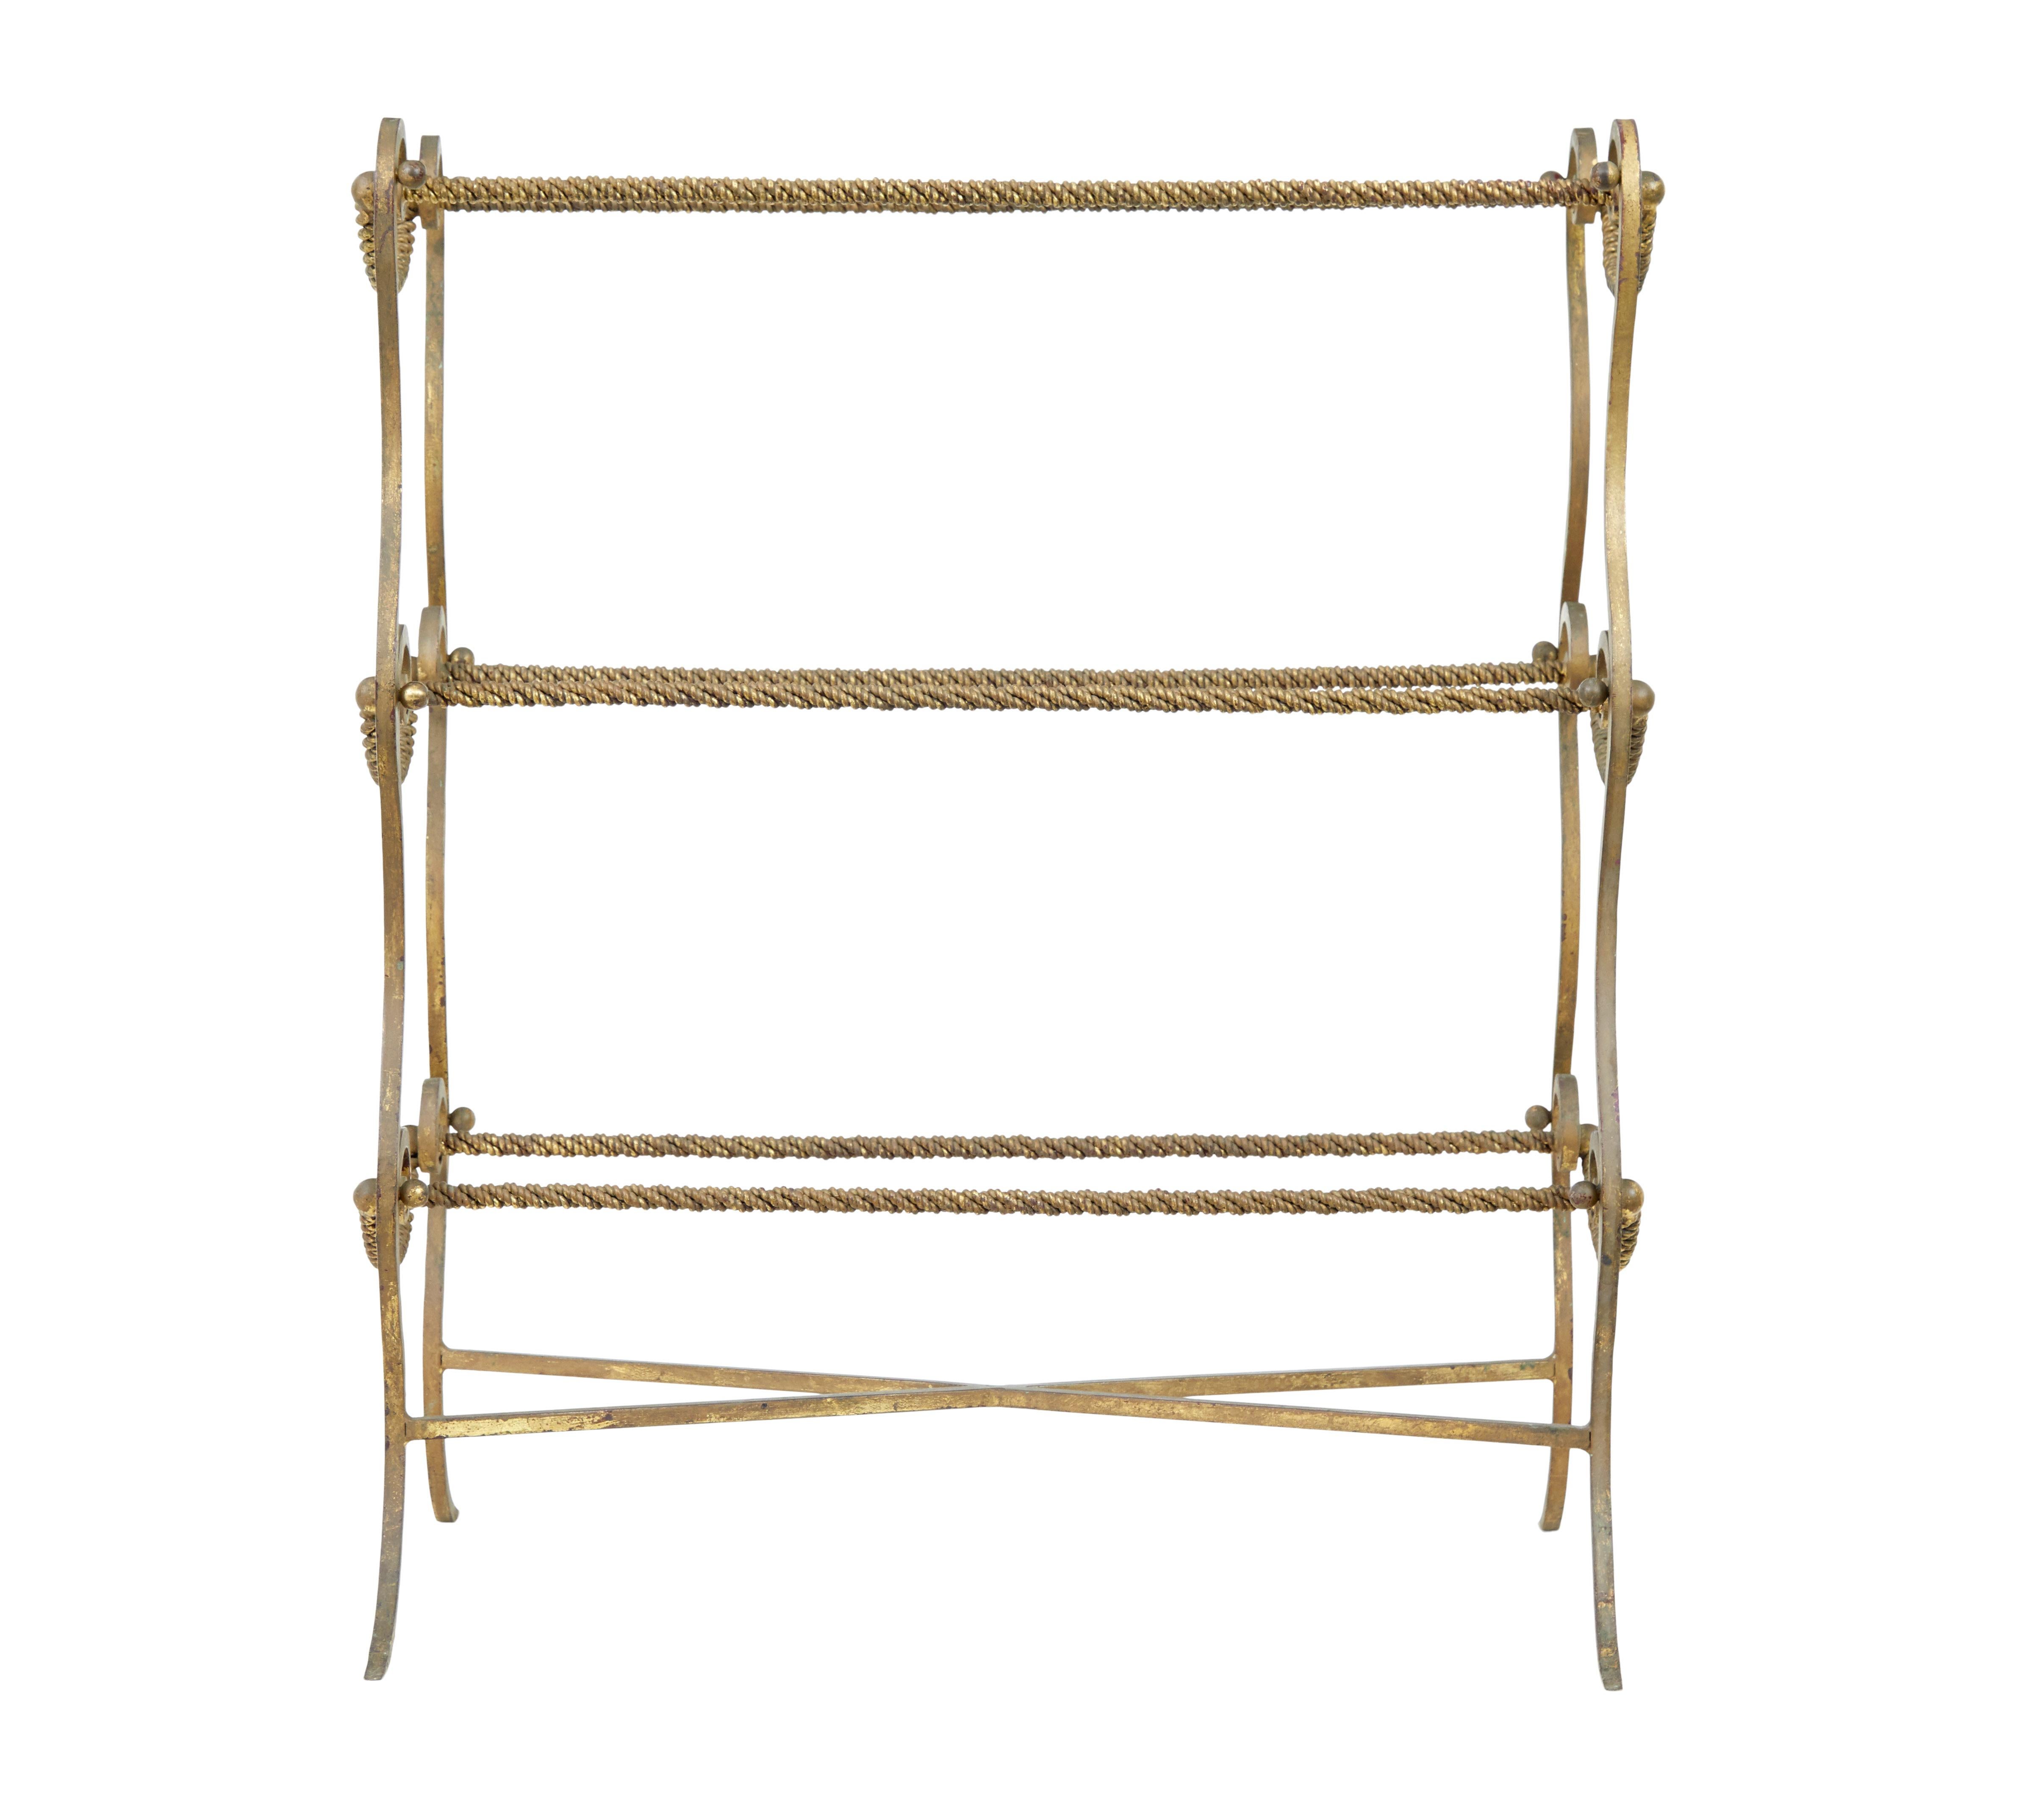 1960’s decorative metalwork towel rail.

Rococo style towel rail, hand crafted rope twist metal work, providing 3 double sided tiers for suspending towels or clothes.  Good proportions that won't overtake a room.  Brass/gilt effect paint now showing